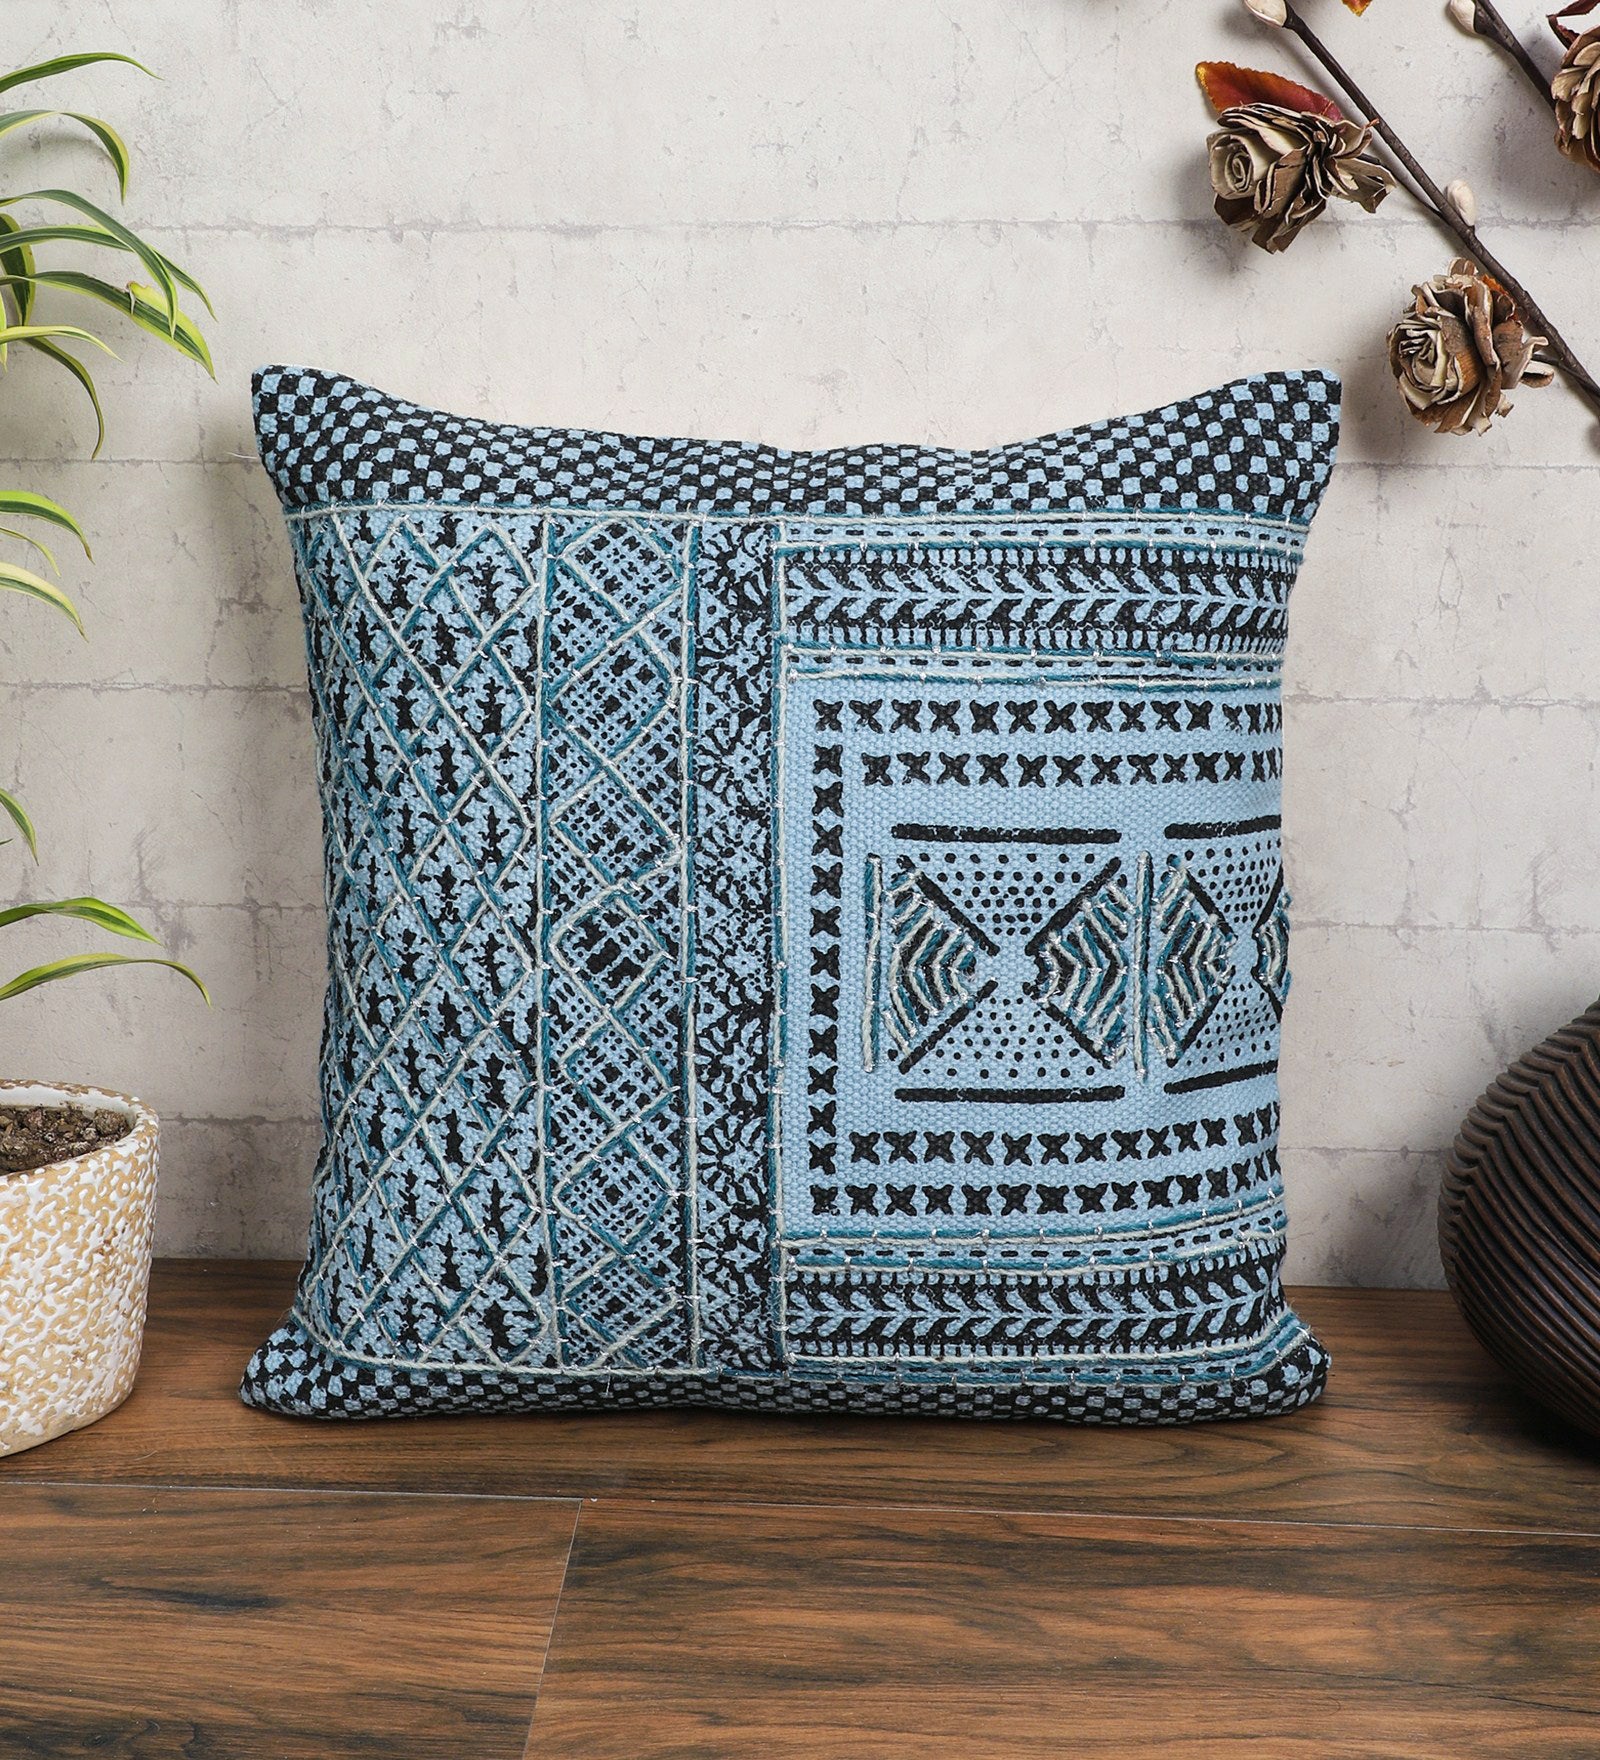 Embroidered Contemporary Cushion Cover (Blue Check Design)